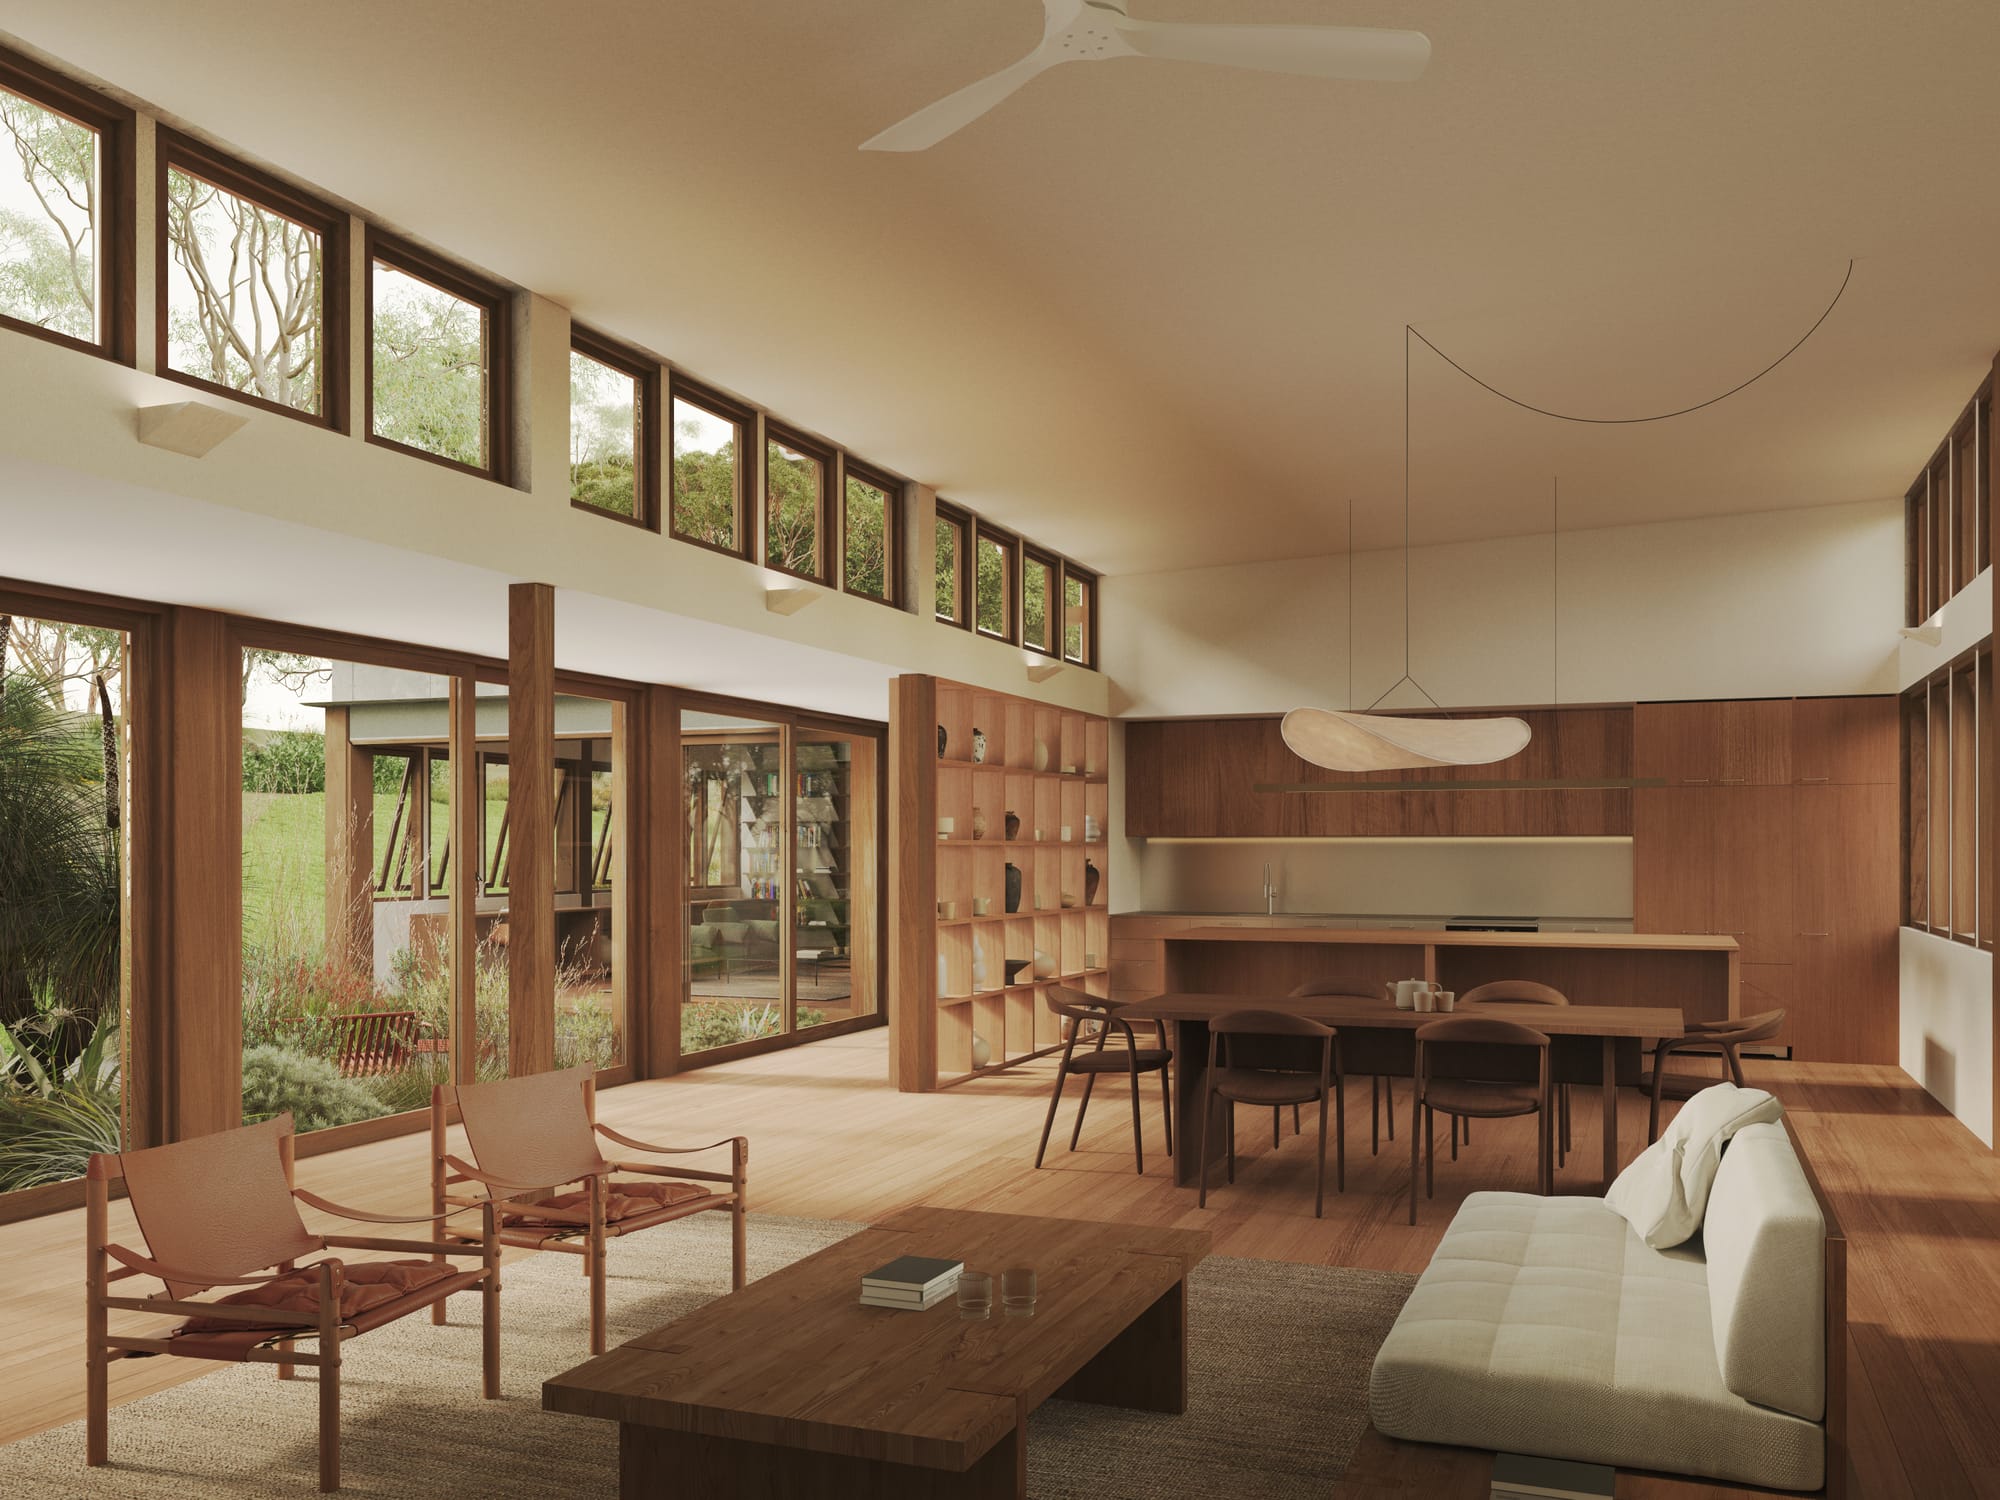 Mulloway House. Renders copyright of CHOIRENDER. Open plan kitchen, living and dining space with timber floors, floors, framed windows and furniture. Windows overlook native garden.